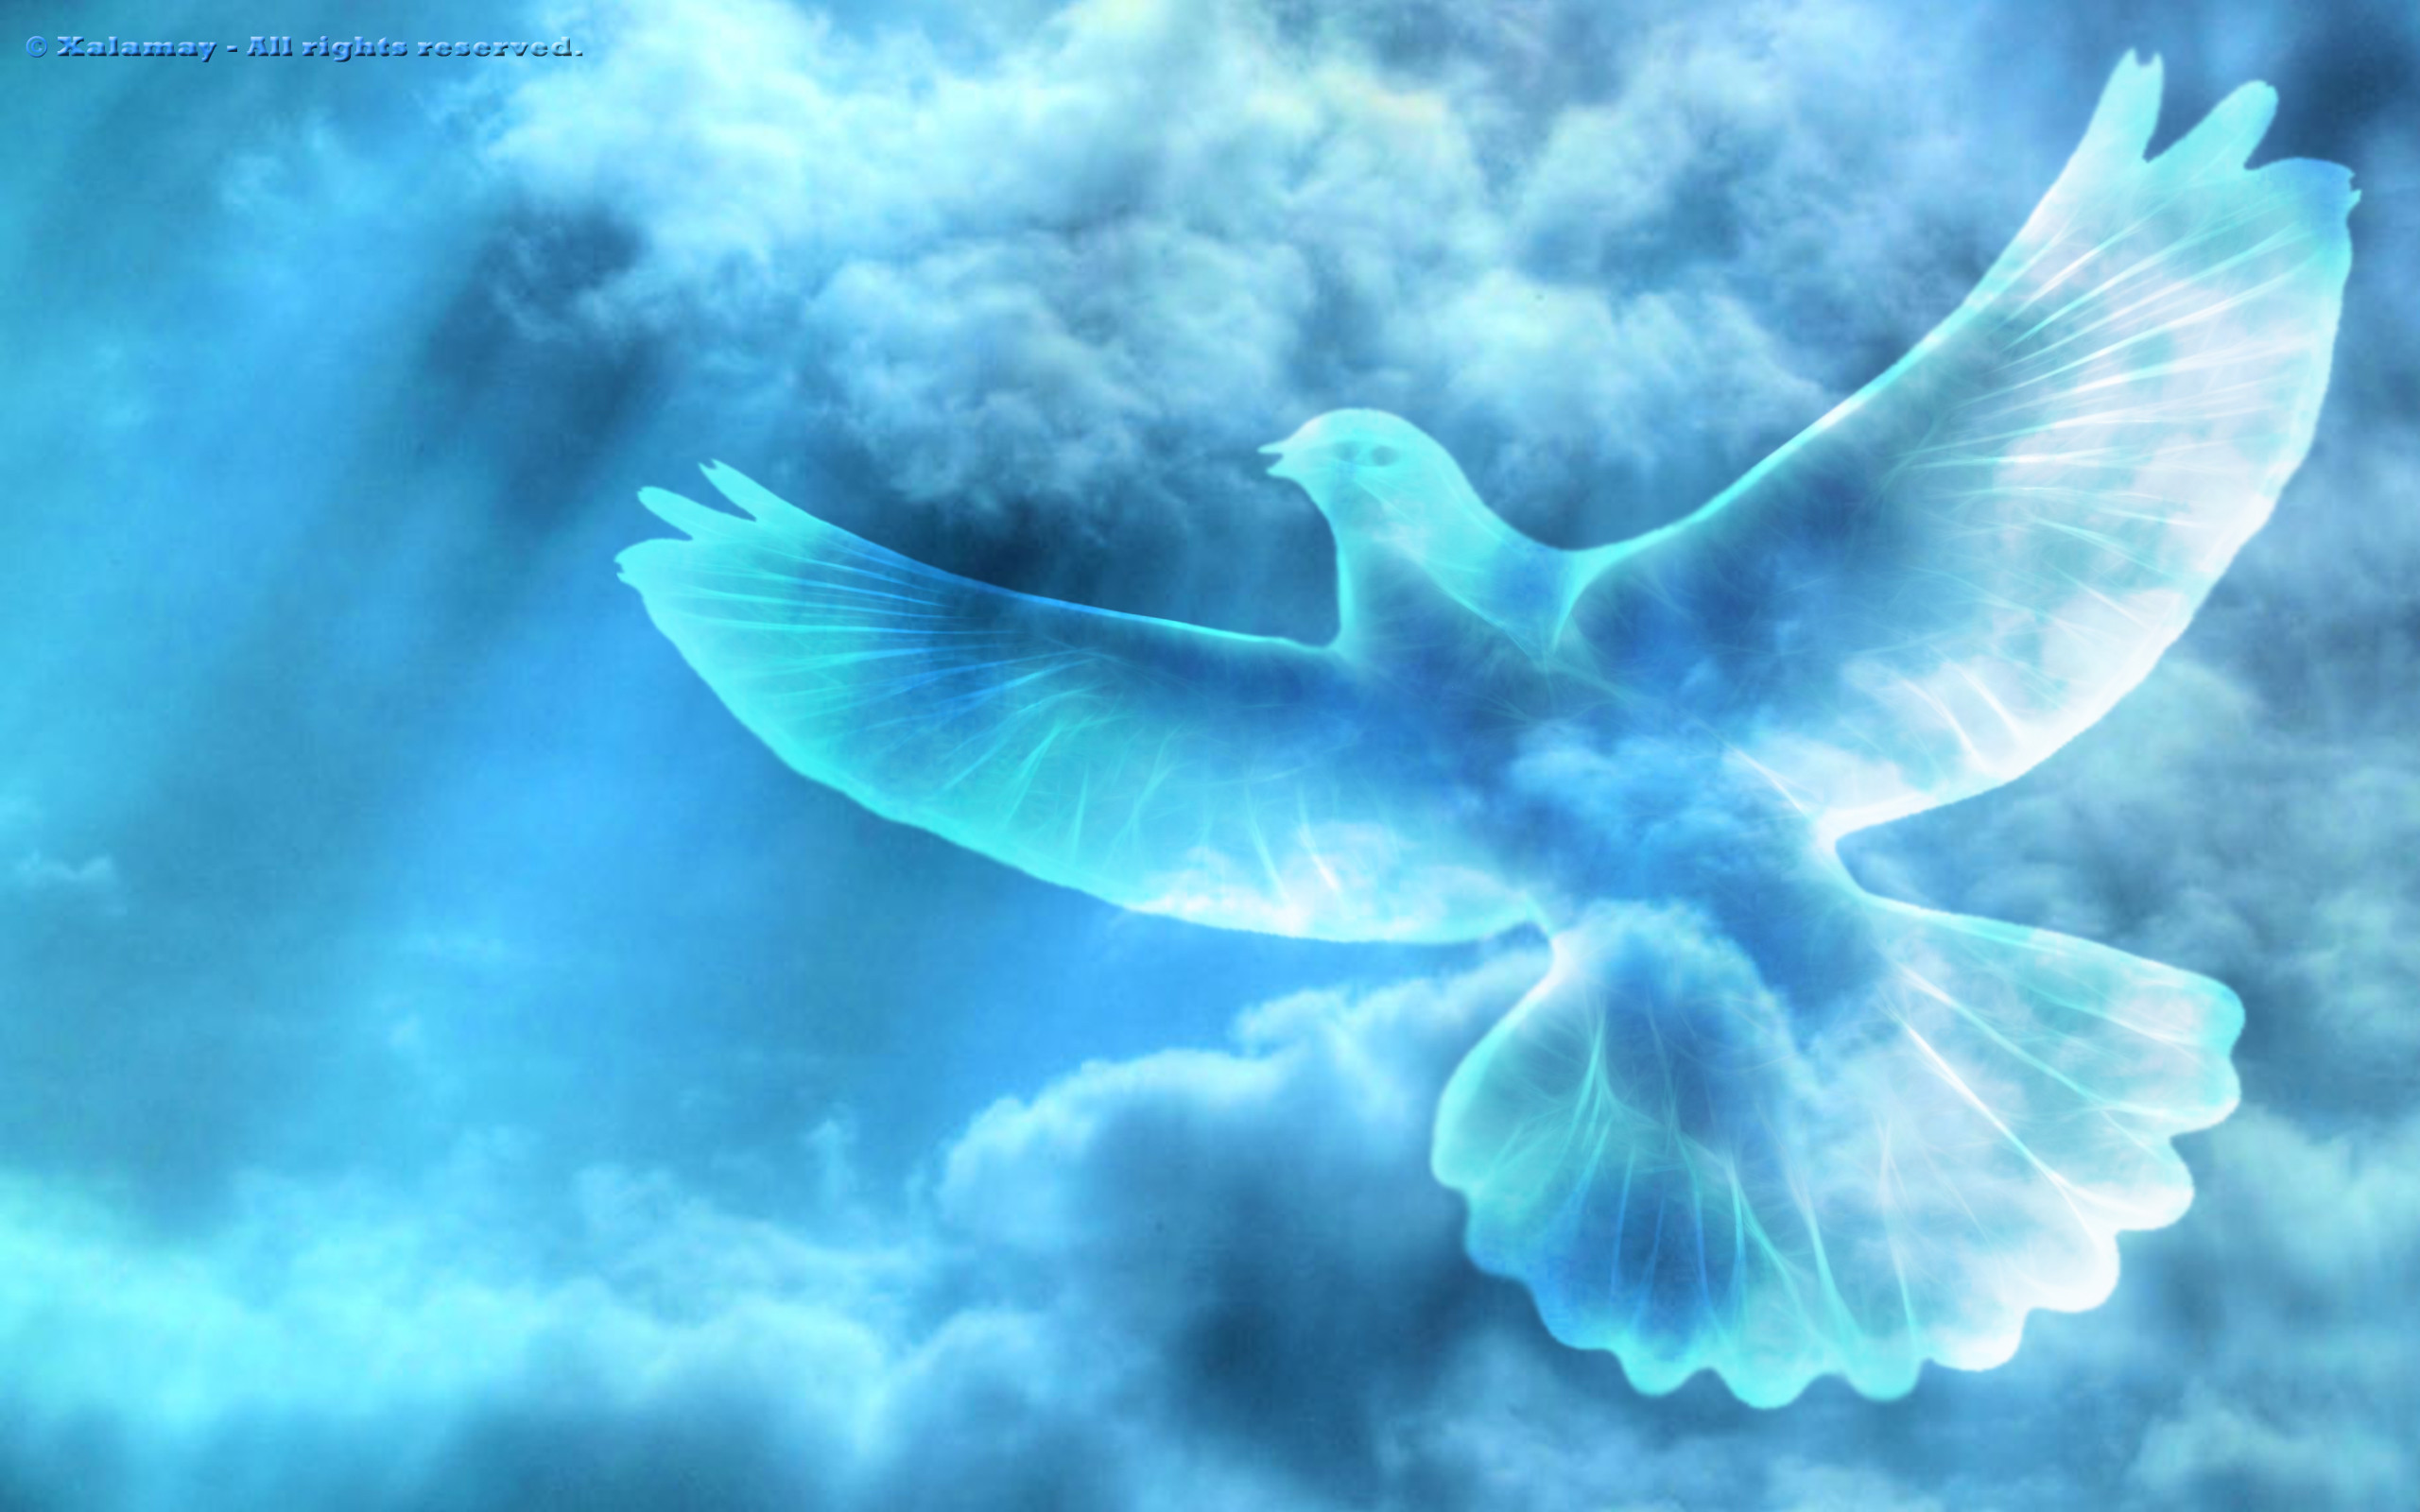 Holy Spirit Wallpapers - Wallpaper Cave